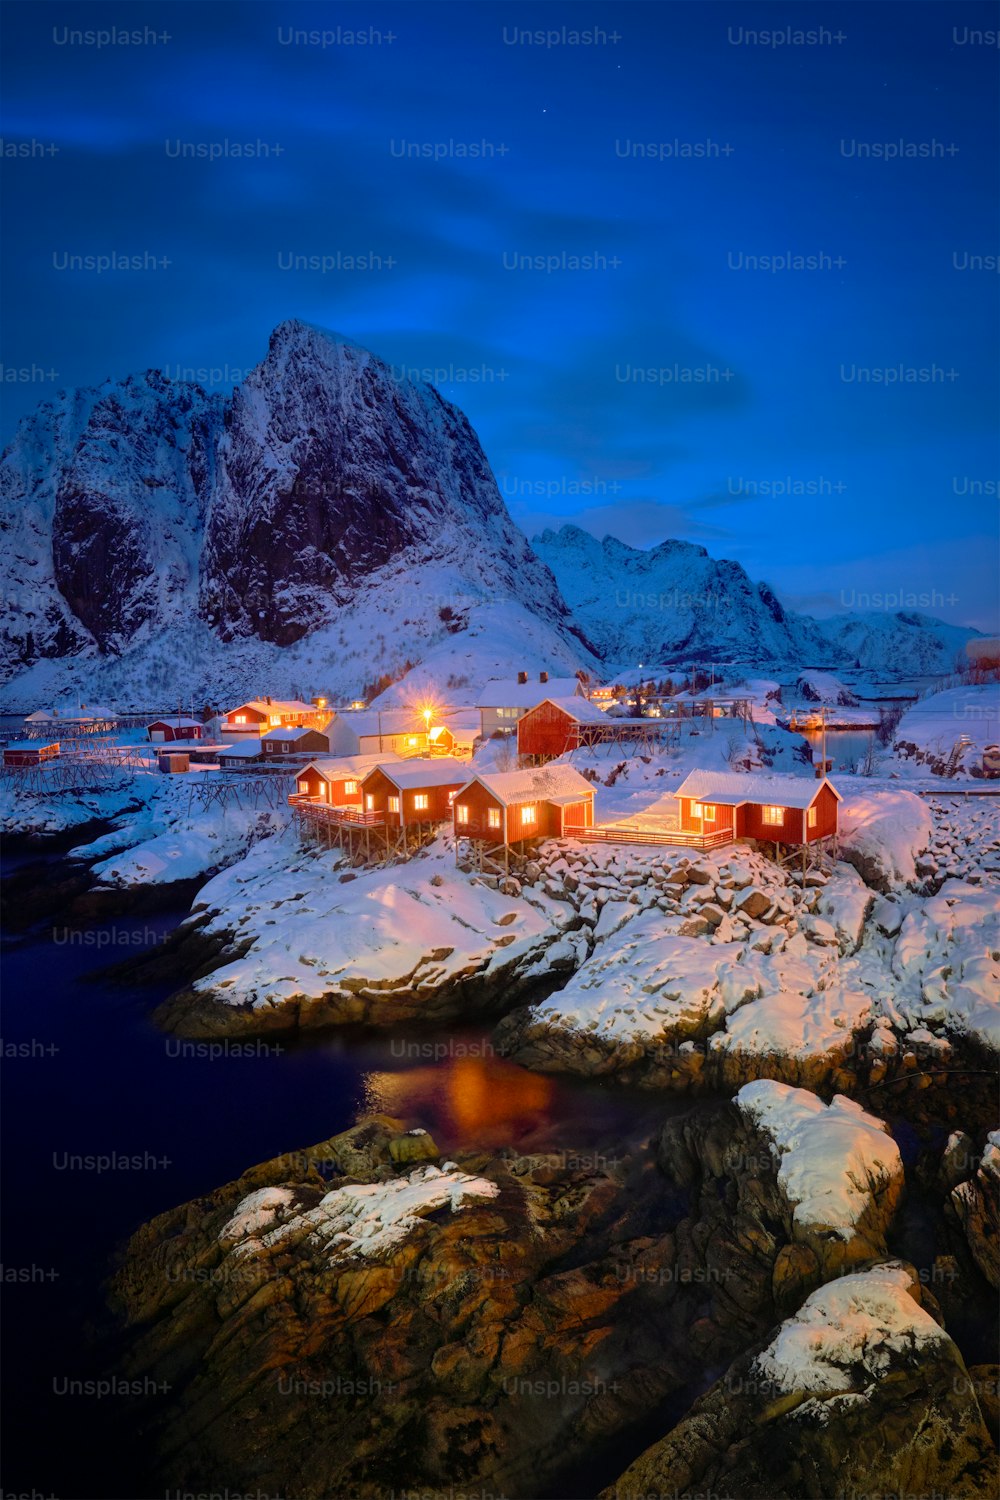 Famous tourist attraction Hamnoy fishing village on Lofoten Islands, Norway with red rorbu houses in winter snow illuminated in the evening